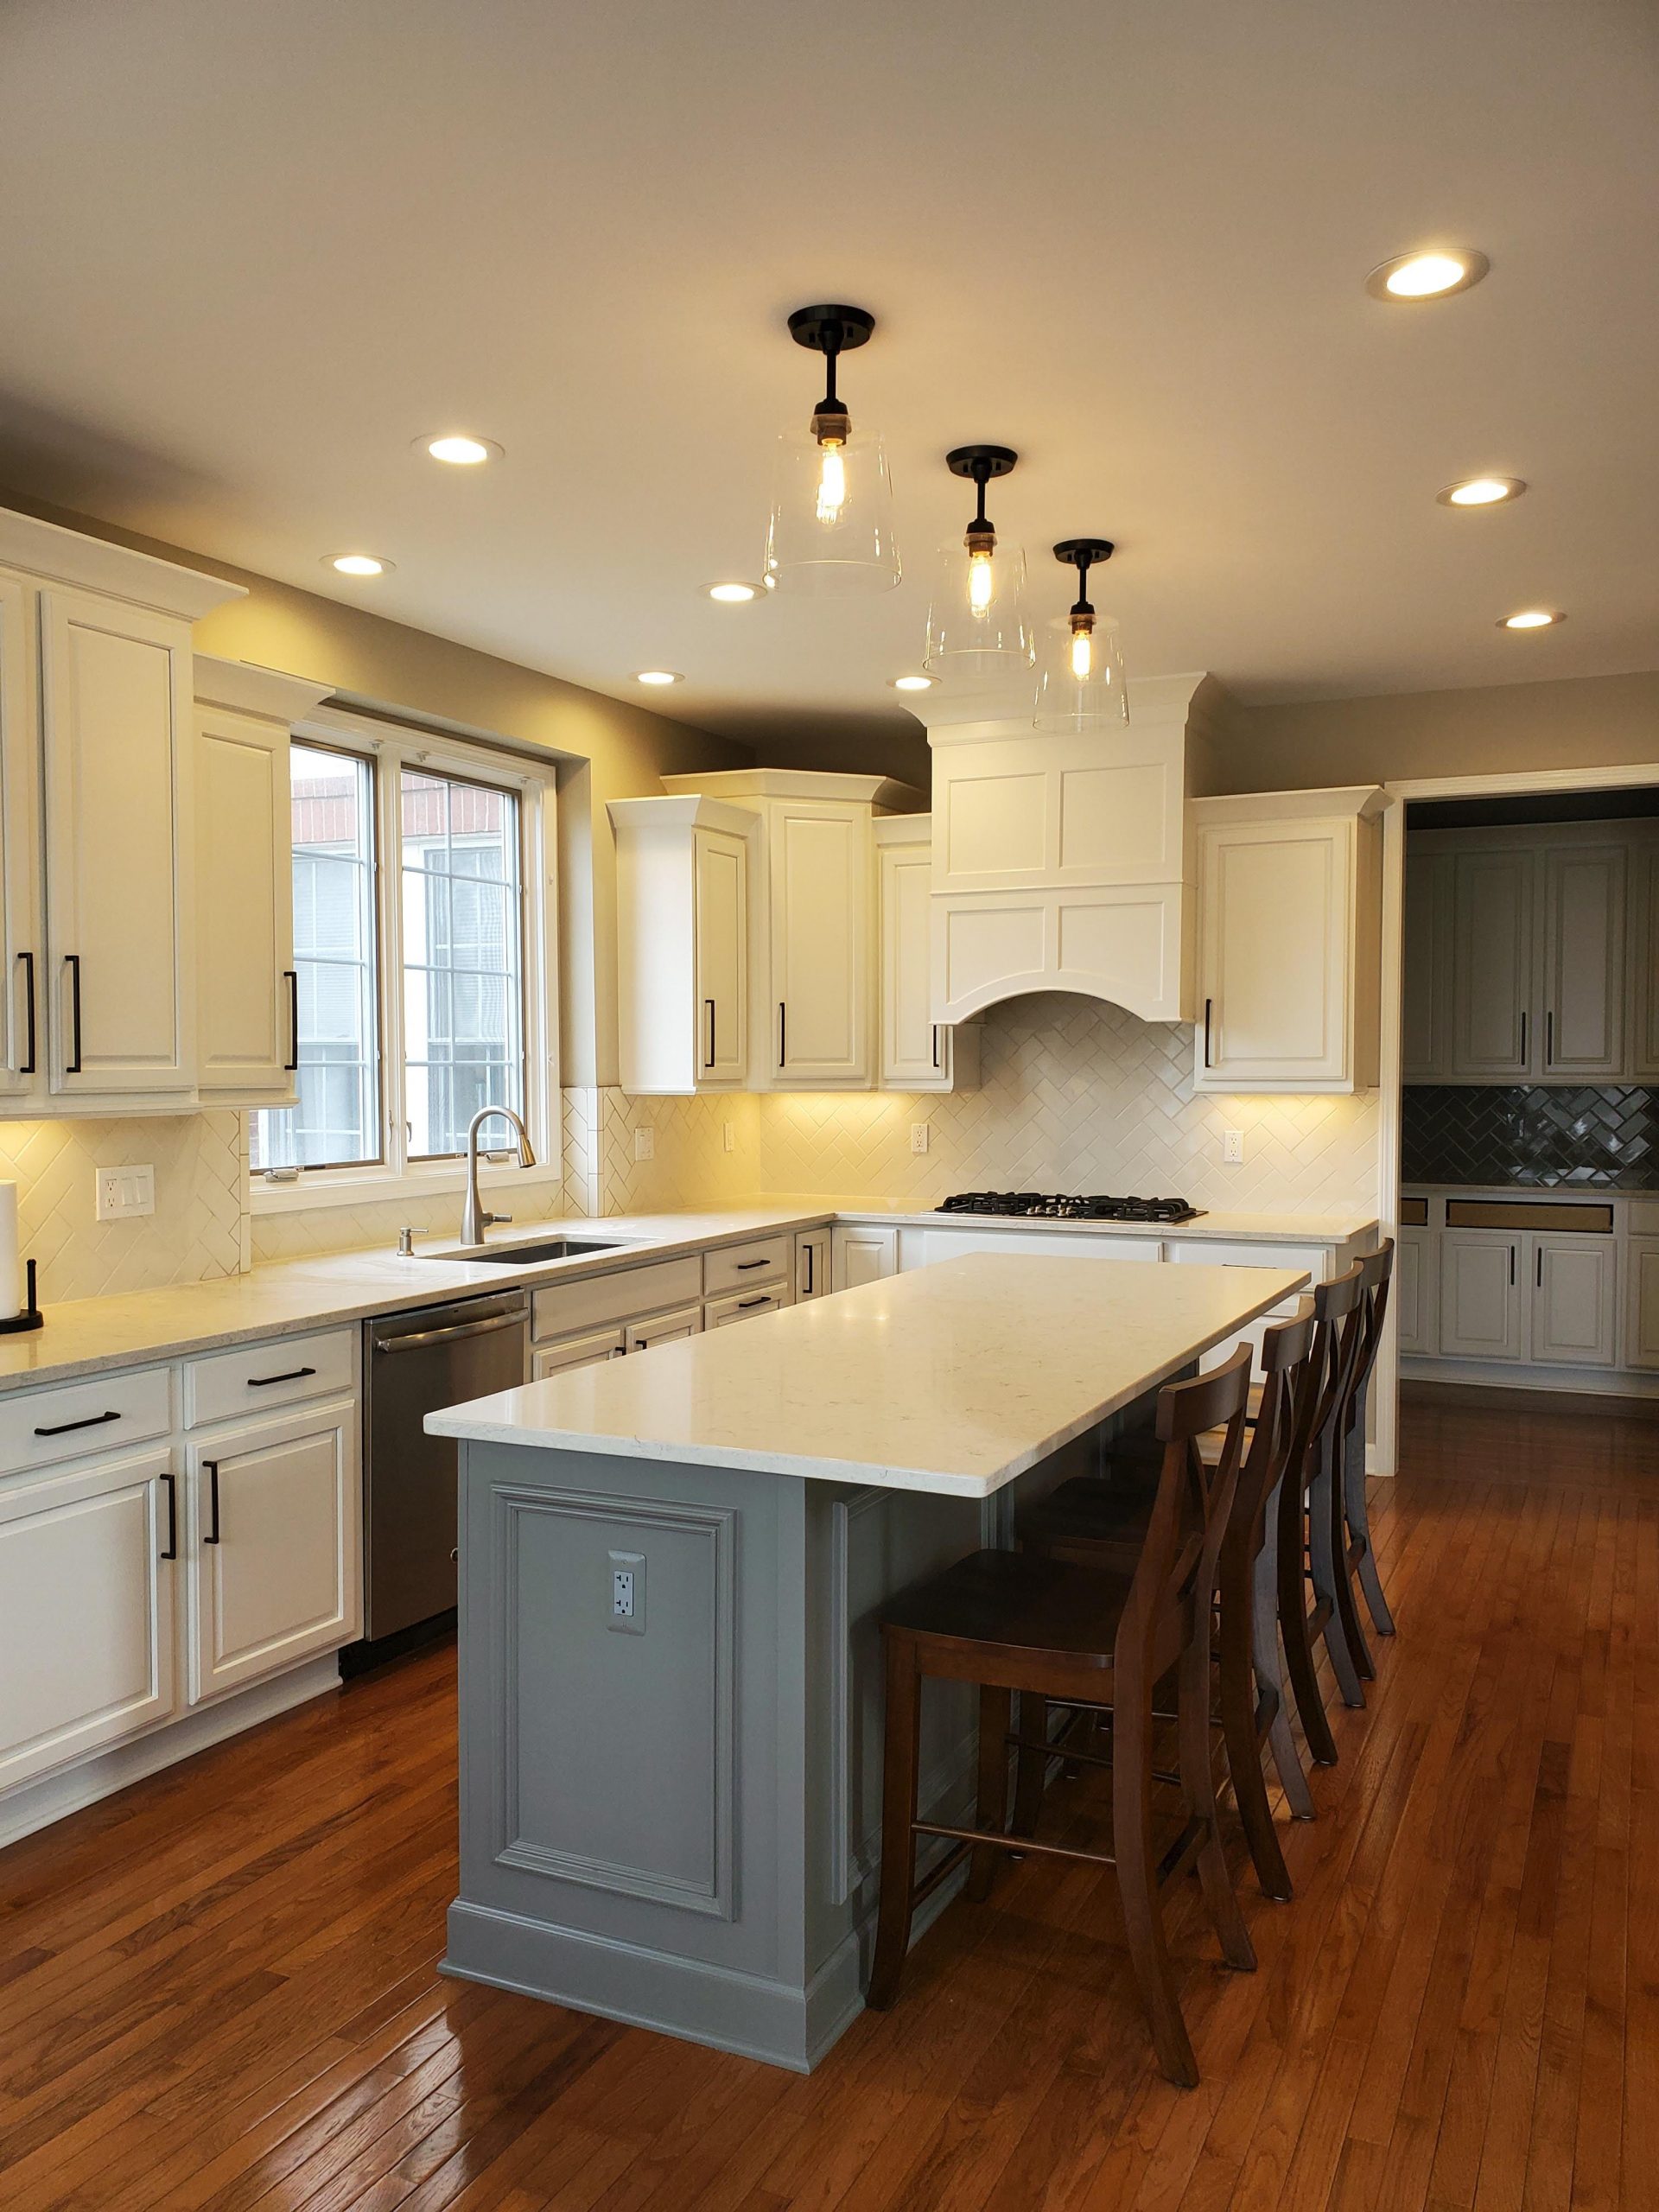 kitchen-remodeling-michigan-home-renovation-project